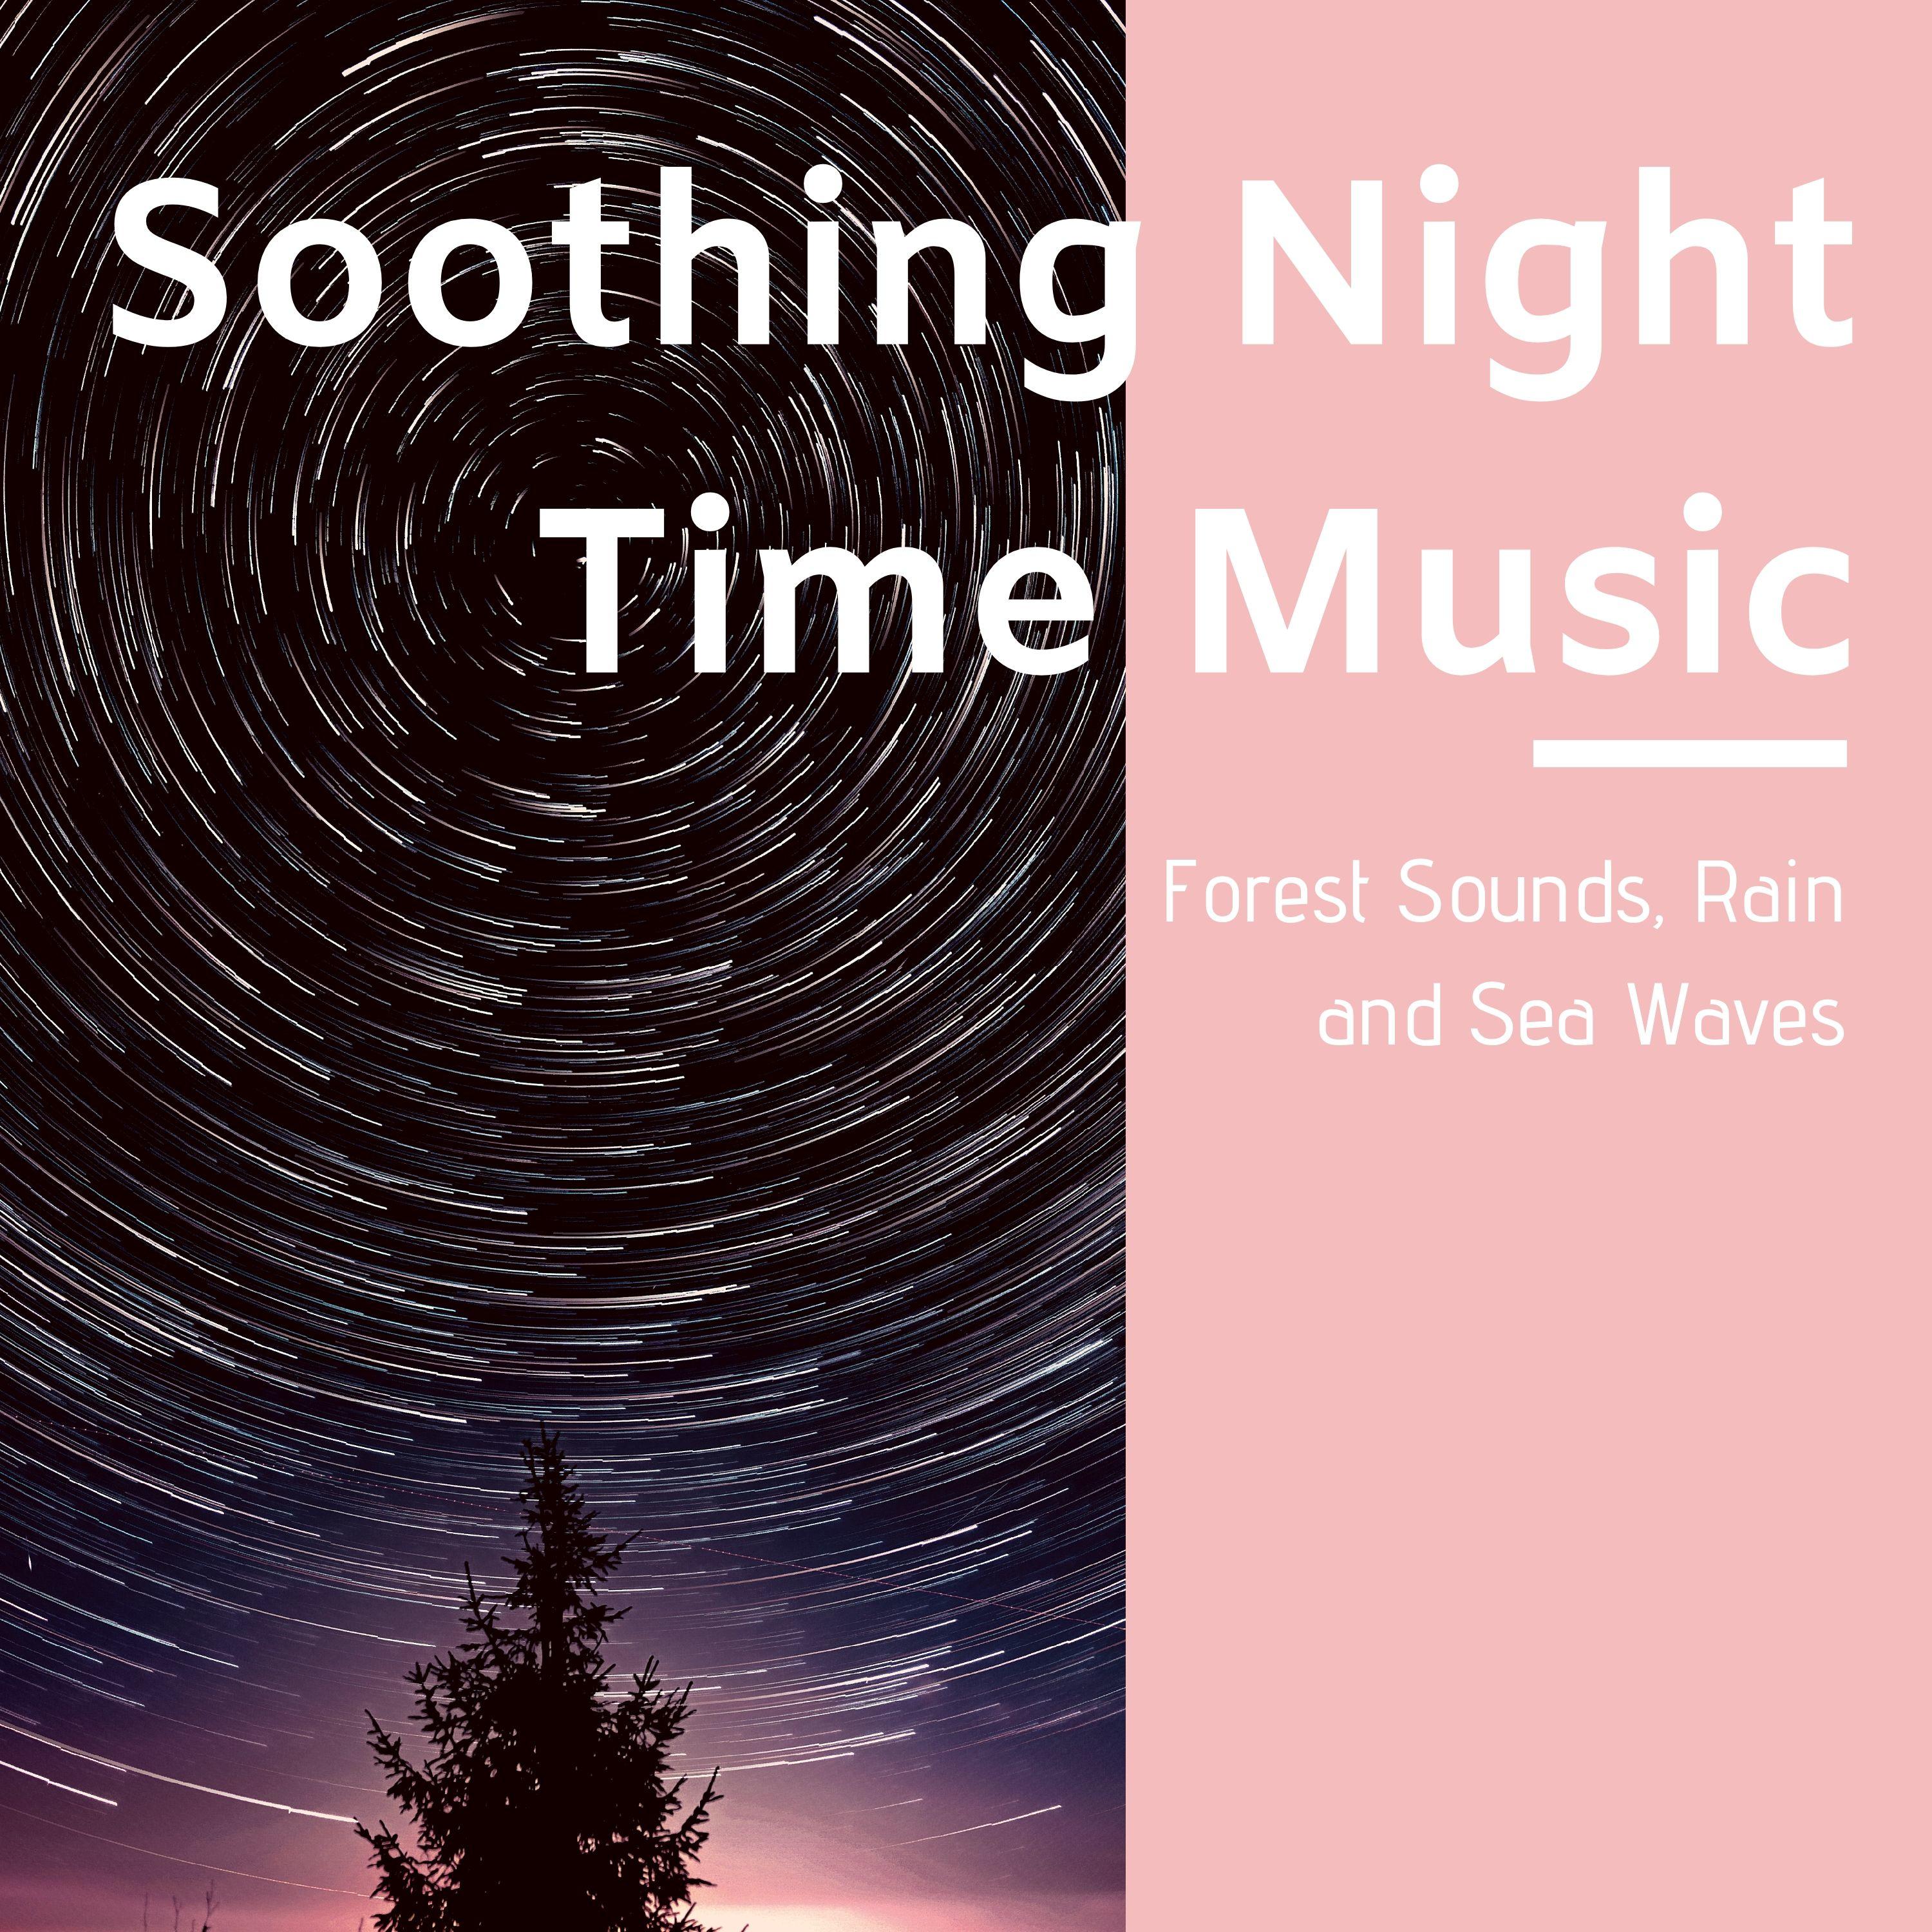 Soothing Night Time Music: Forest Sounds, Rain and Sea Waves